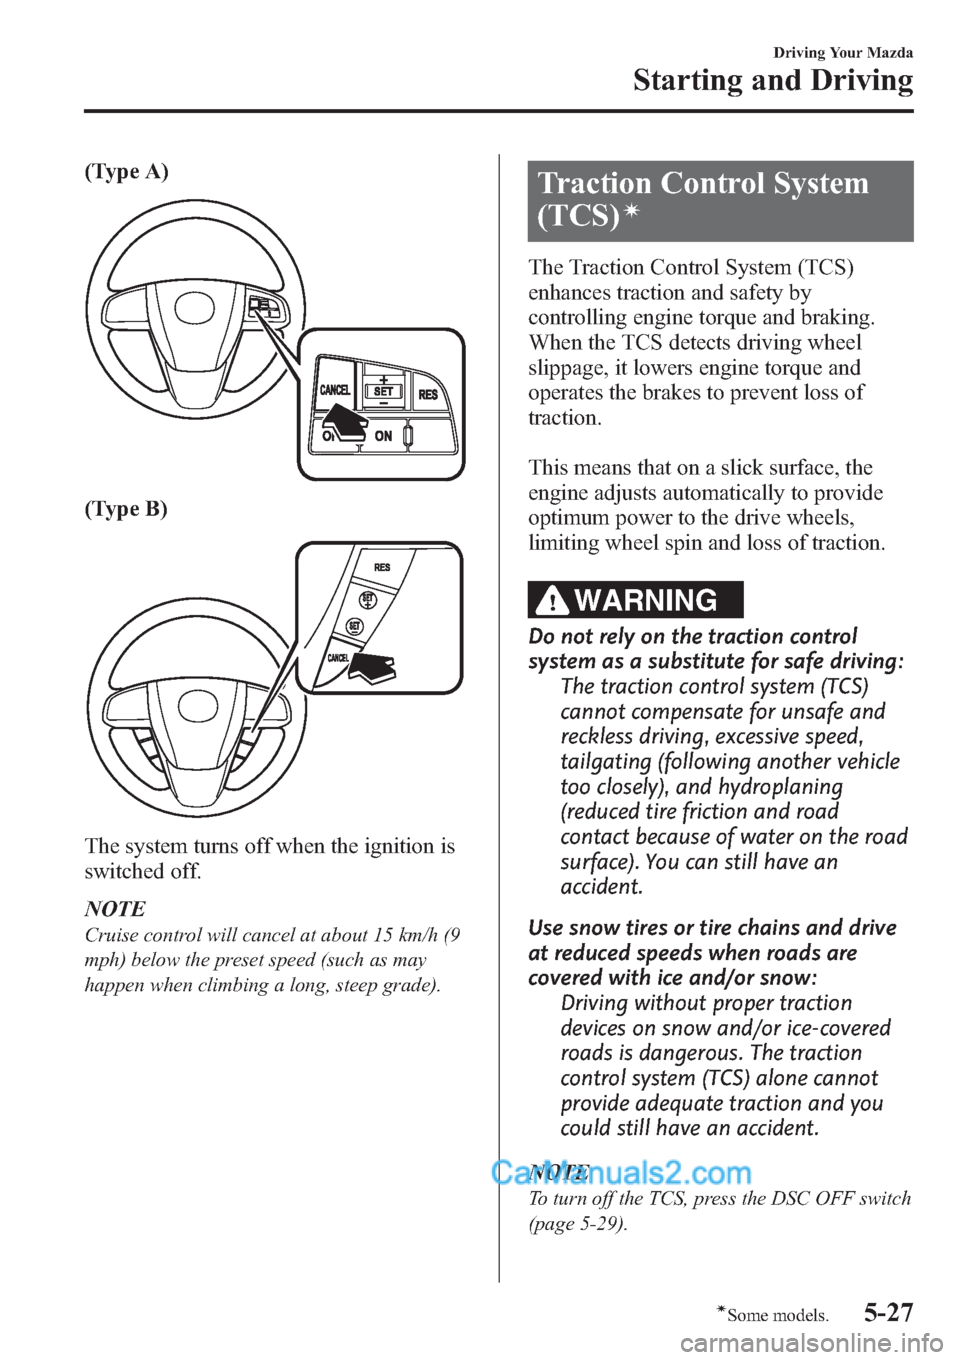 MAZDA MODEL MAZDASPEED 3 2013  Owners Manual (in English) (Type A)
(Type B)
The system turns off when the ignition is
switched off.
NOTE
Cruise control will cancel at about 15 km/h (9
mph) below the preset speed (such as may
happen when climbing a long, stee